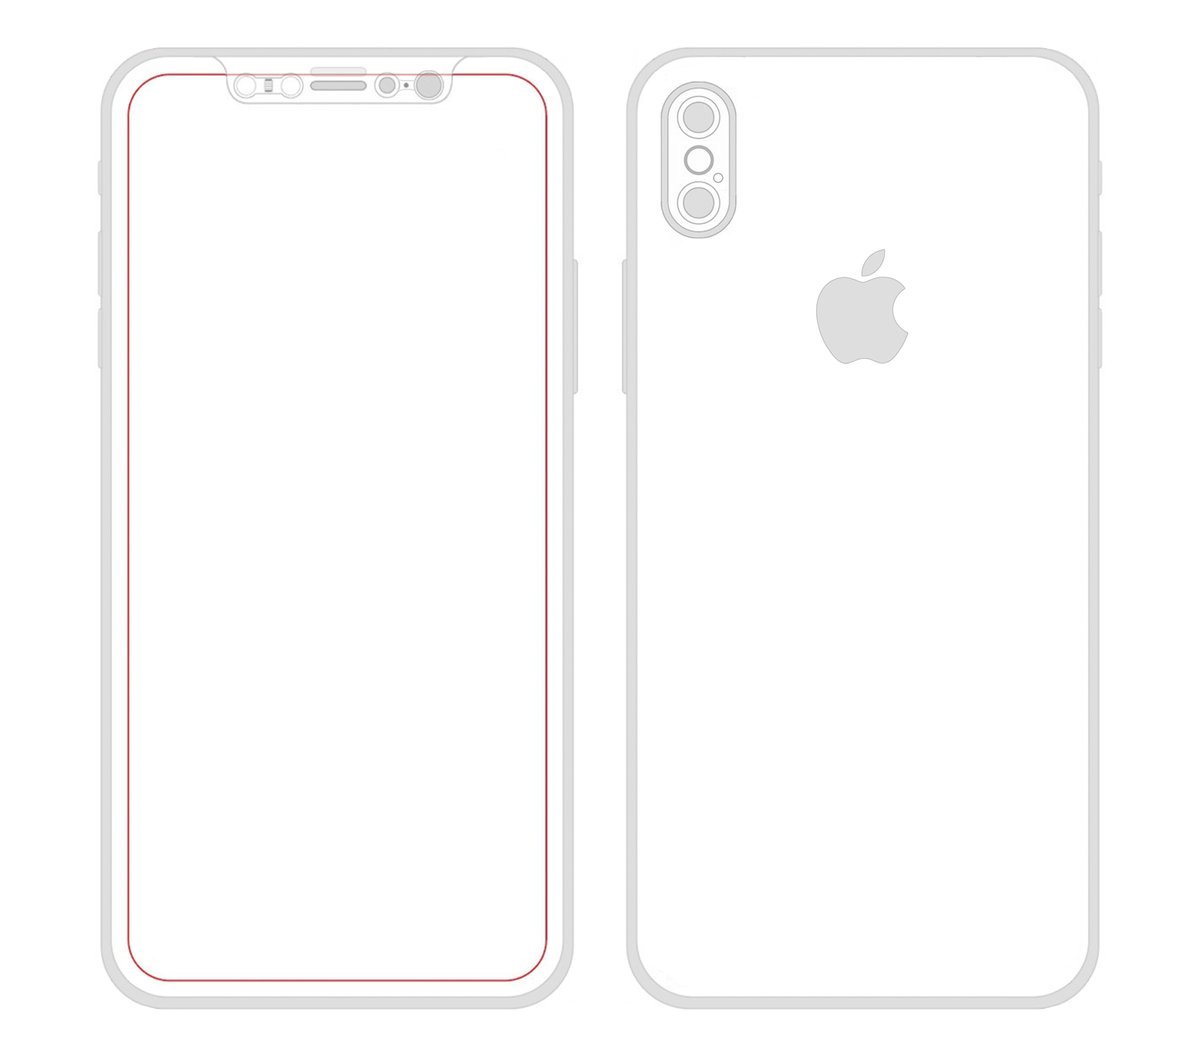 Apple iPhone 8 Dummy Model Appears: Dual Camera, No Touch ID Button